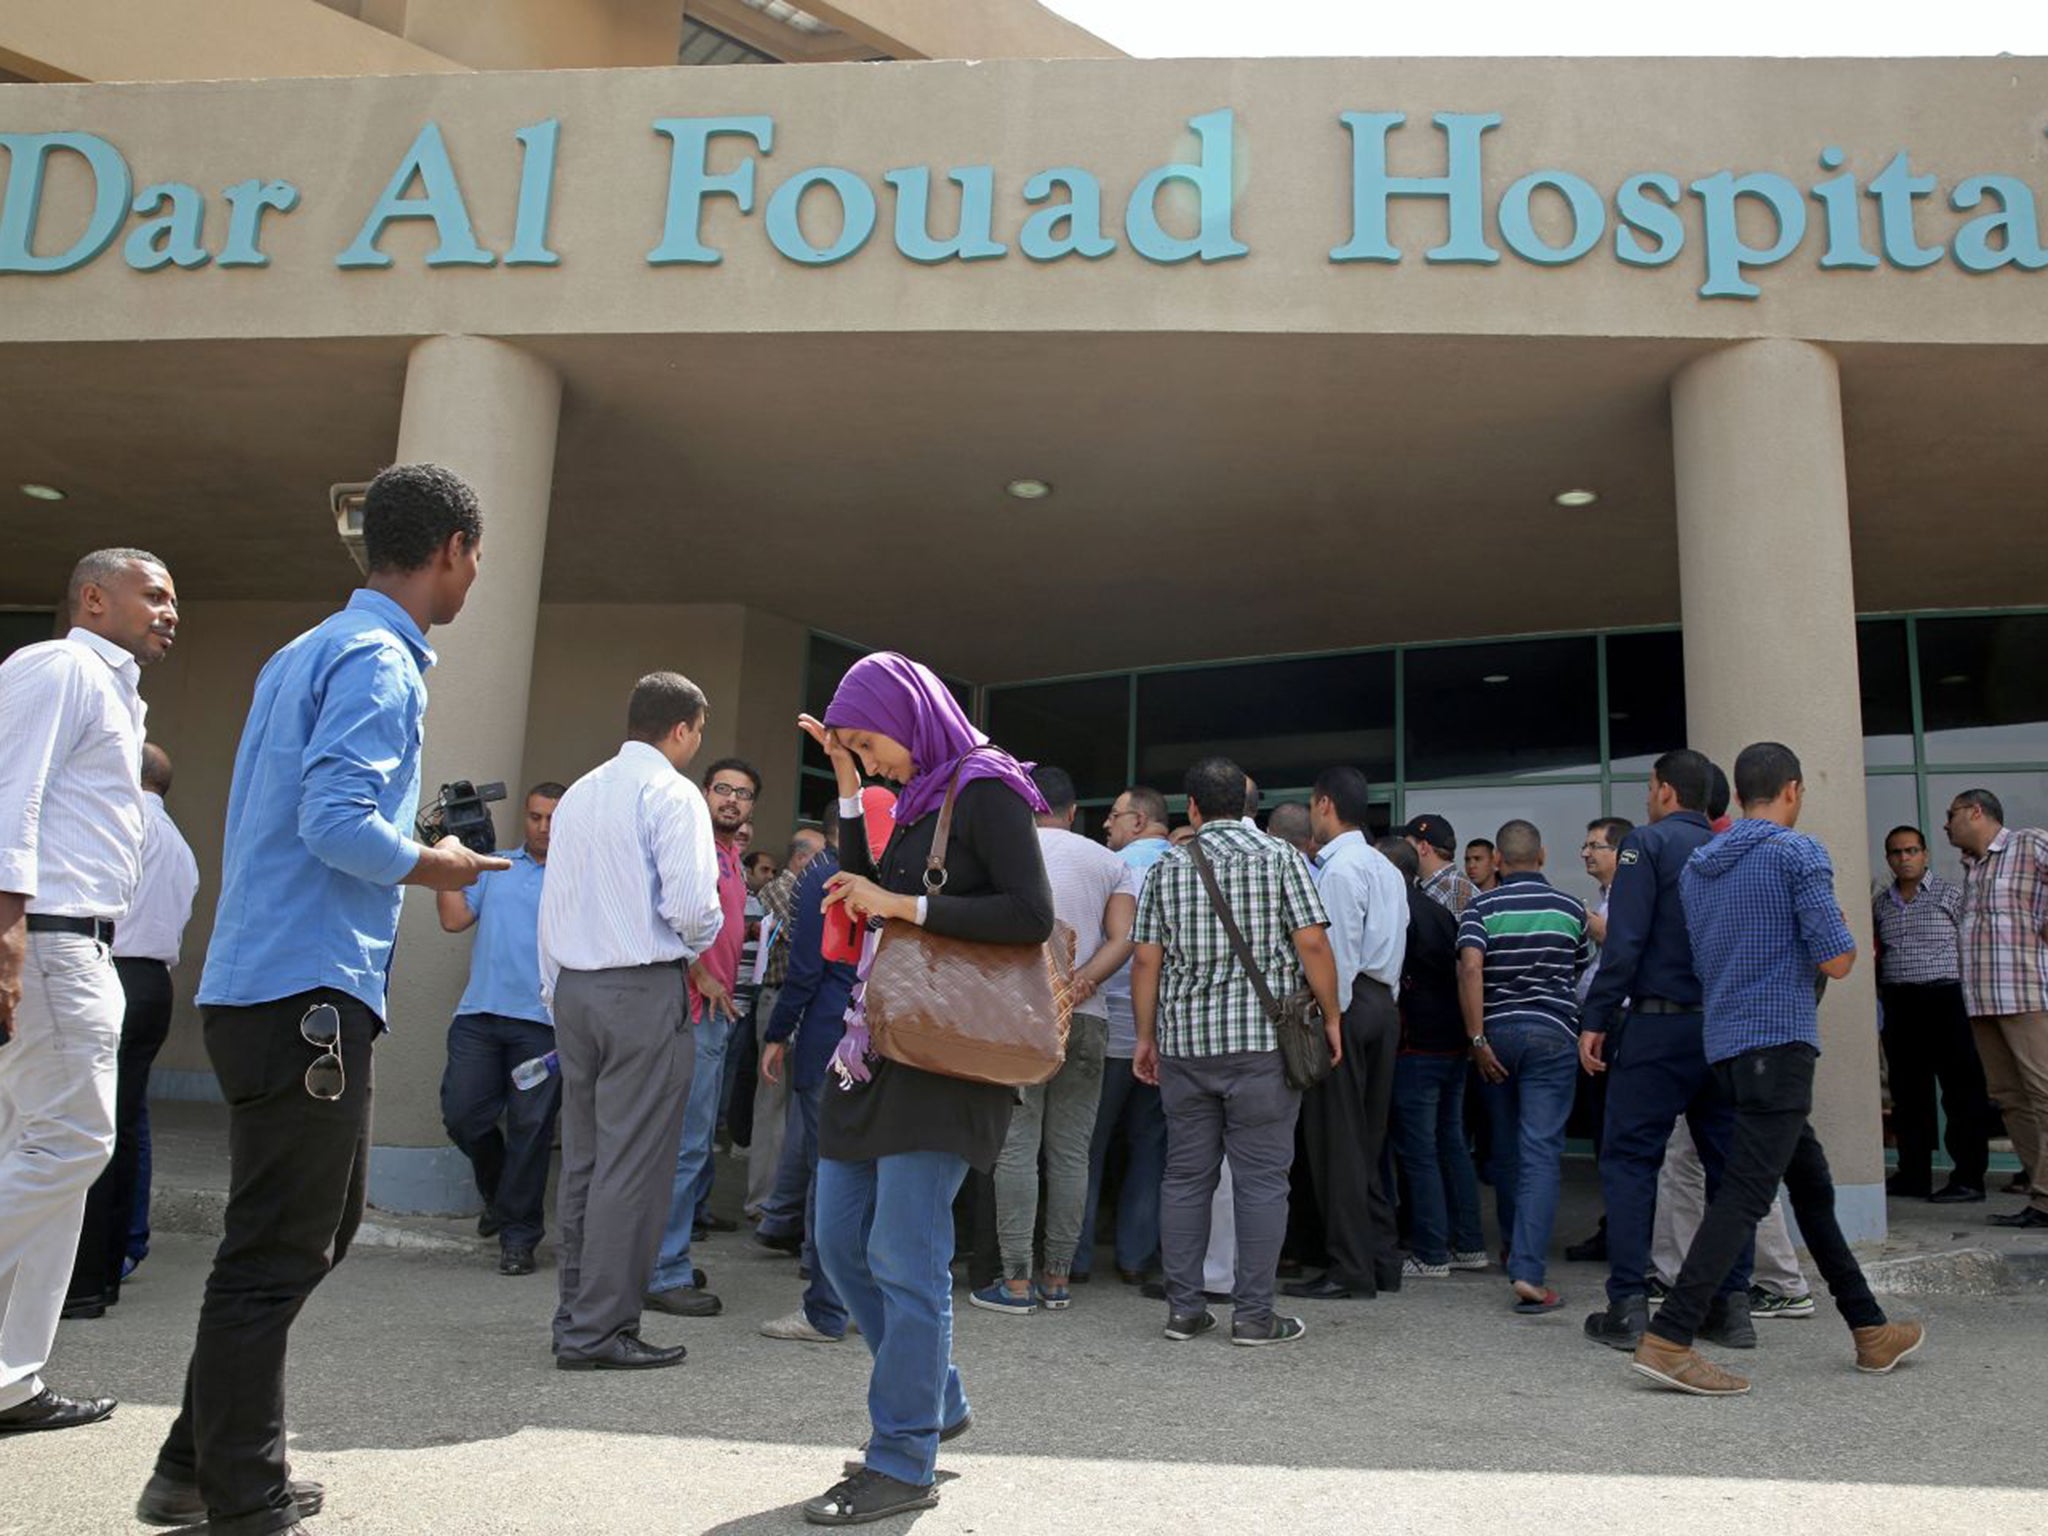 Egyptian journalists wait for information outside the Dar Al Fouad Hospital in Cairo. At least 12 tourists were killed and 10 injured on a desert safari trip